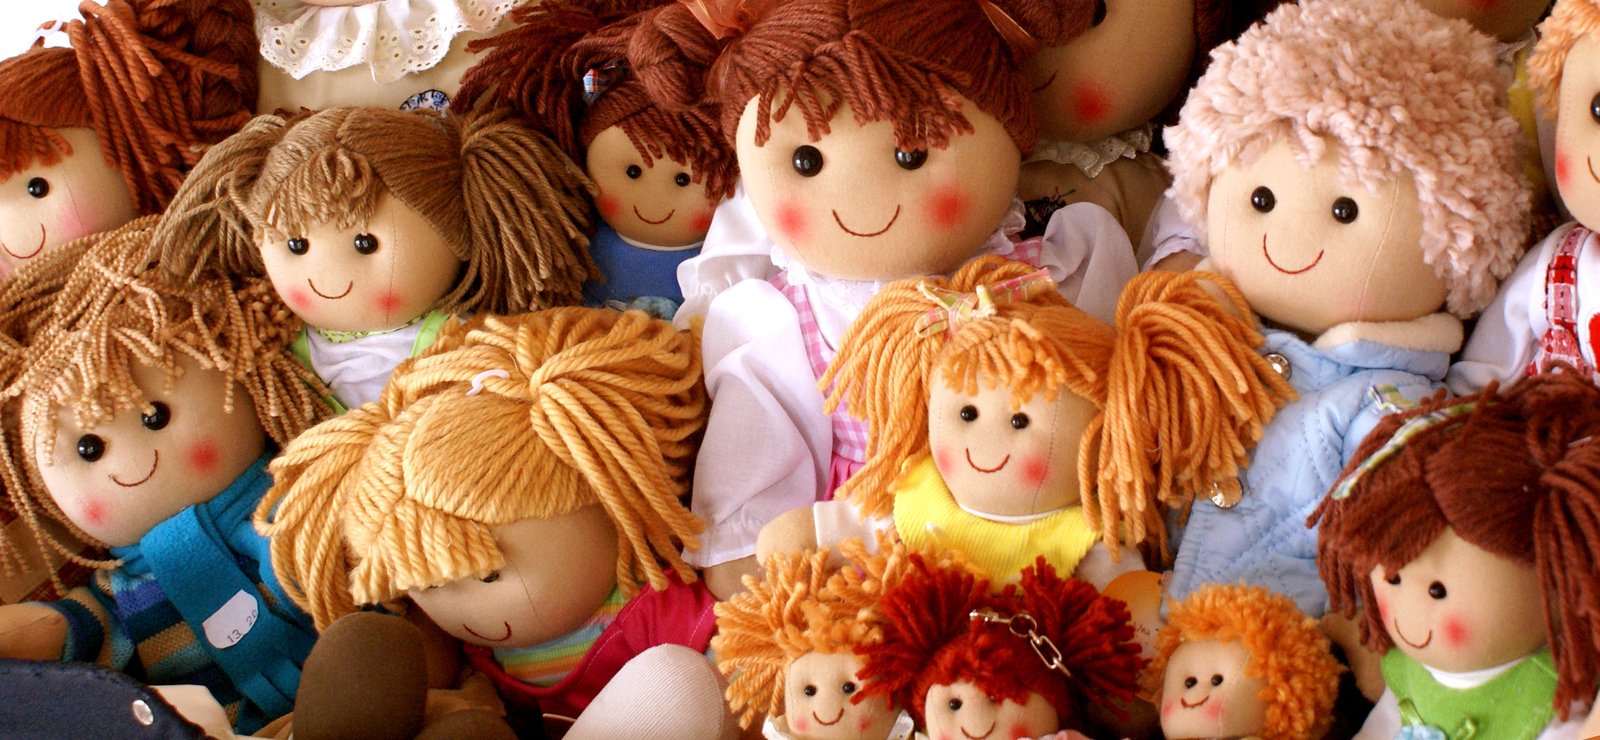 a group of dolls are laying together with their heads turned to look like s